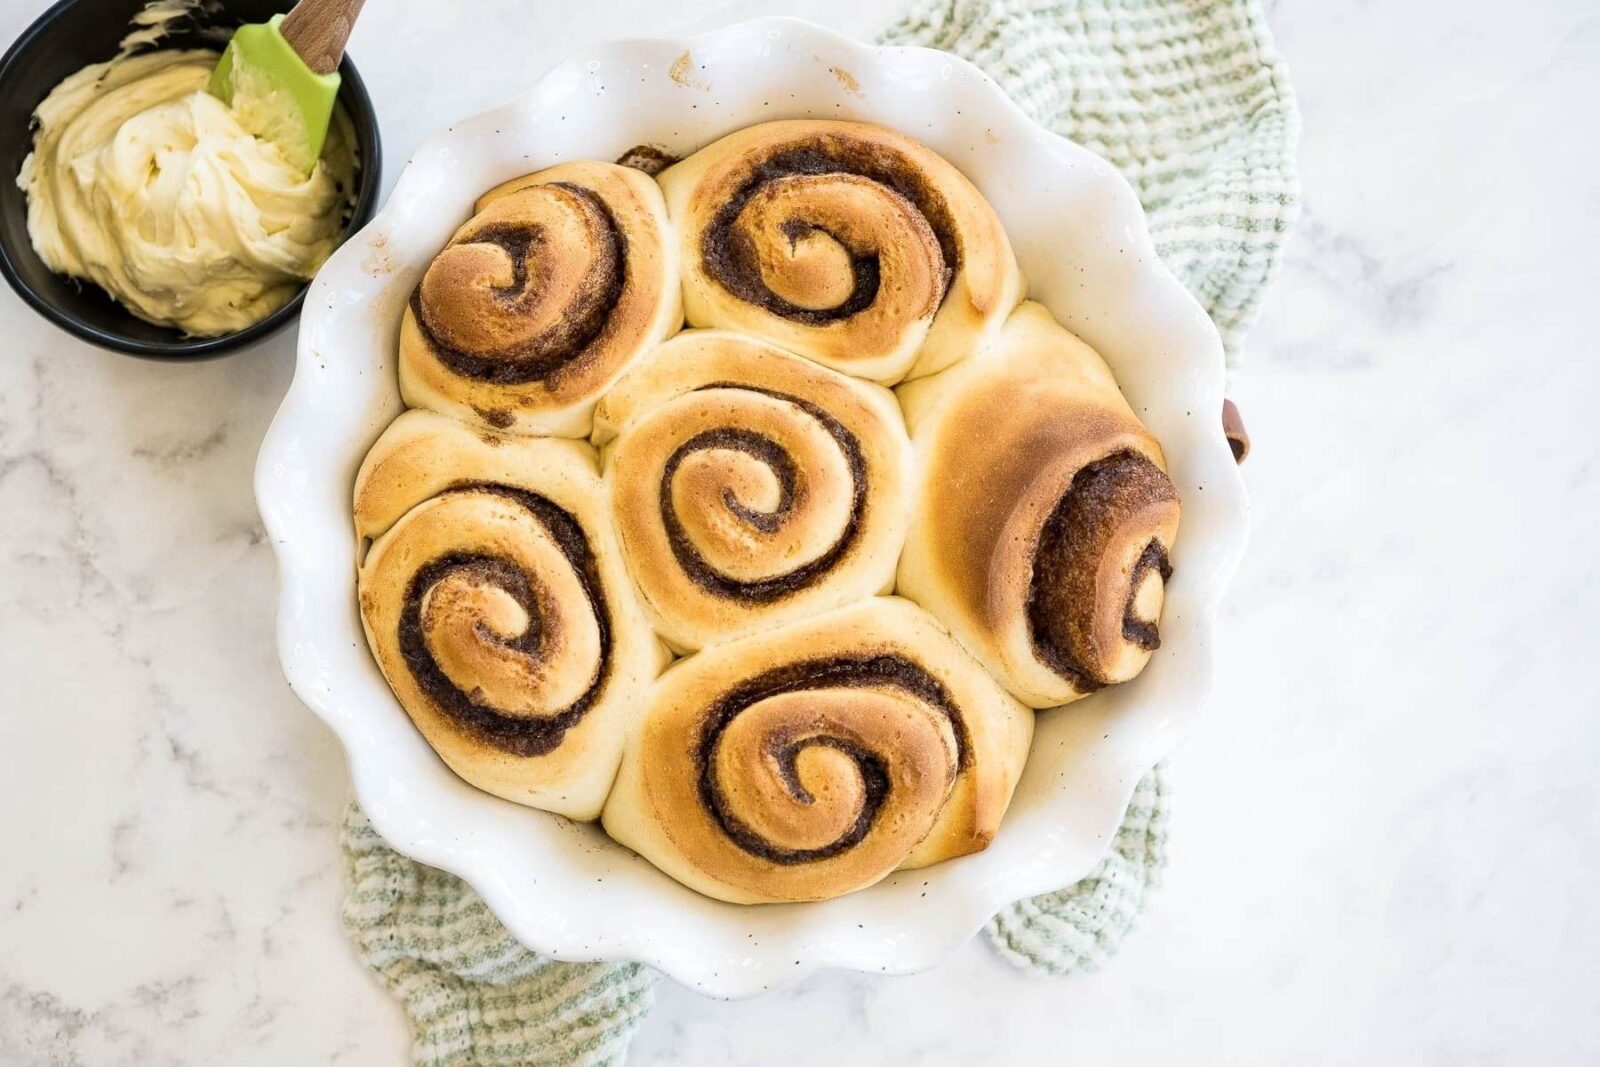 A white decorative serving bowl is filled with golden baked rolls with cinnamon swirl next to icing bowl.